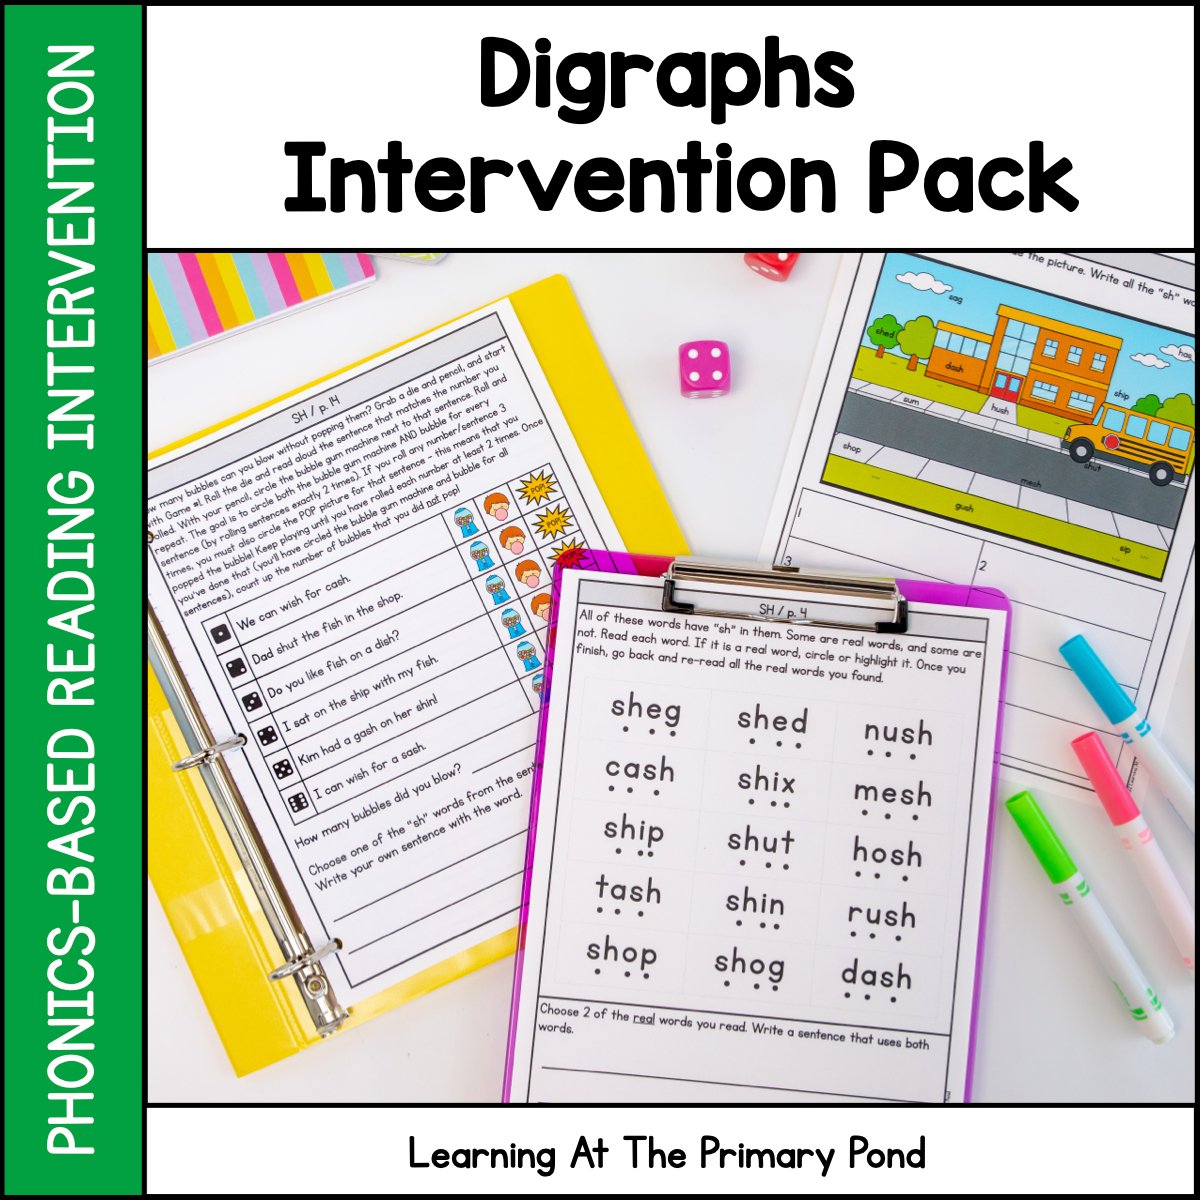 Digraphs Intervention Pack | No-Prep, Phonics-Based Reading Intervention - learning-at-the-primary-pond